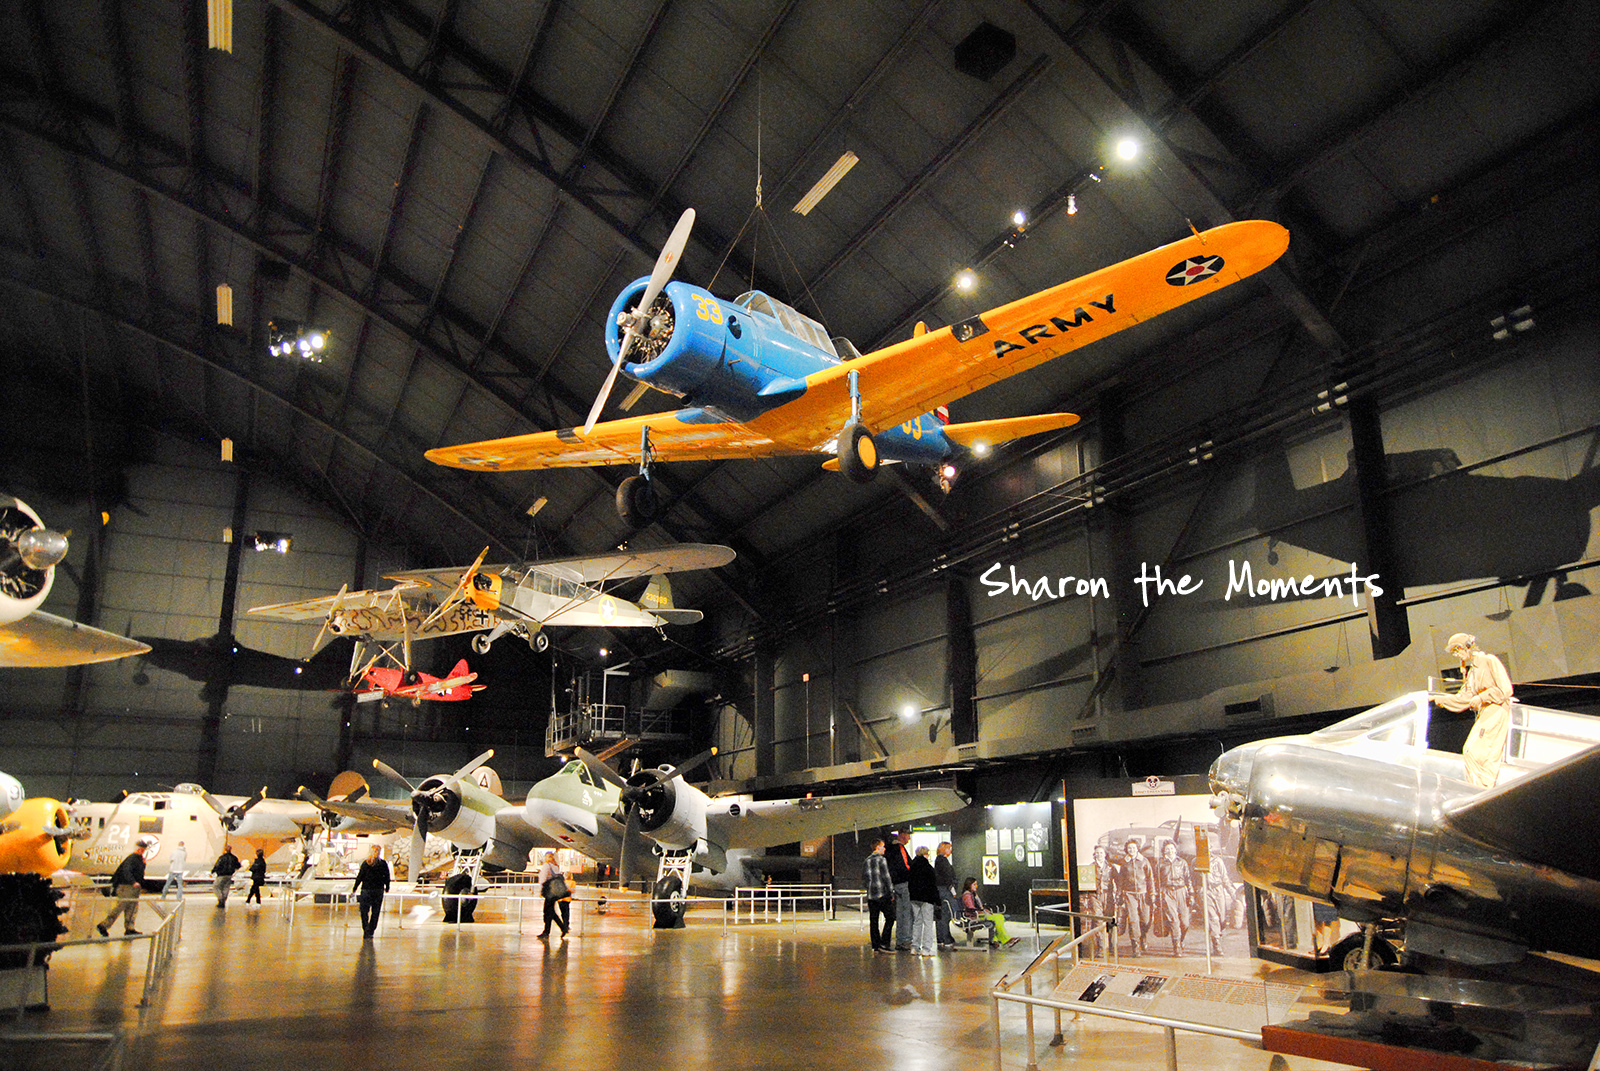 Spring Break Visit to the National Museum of US Air Force|Sharon the Moments blog